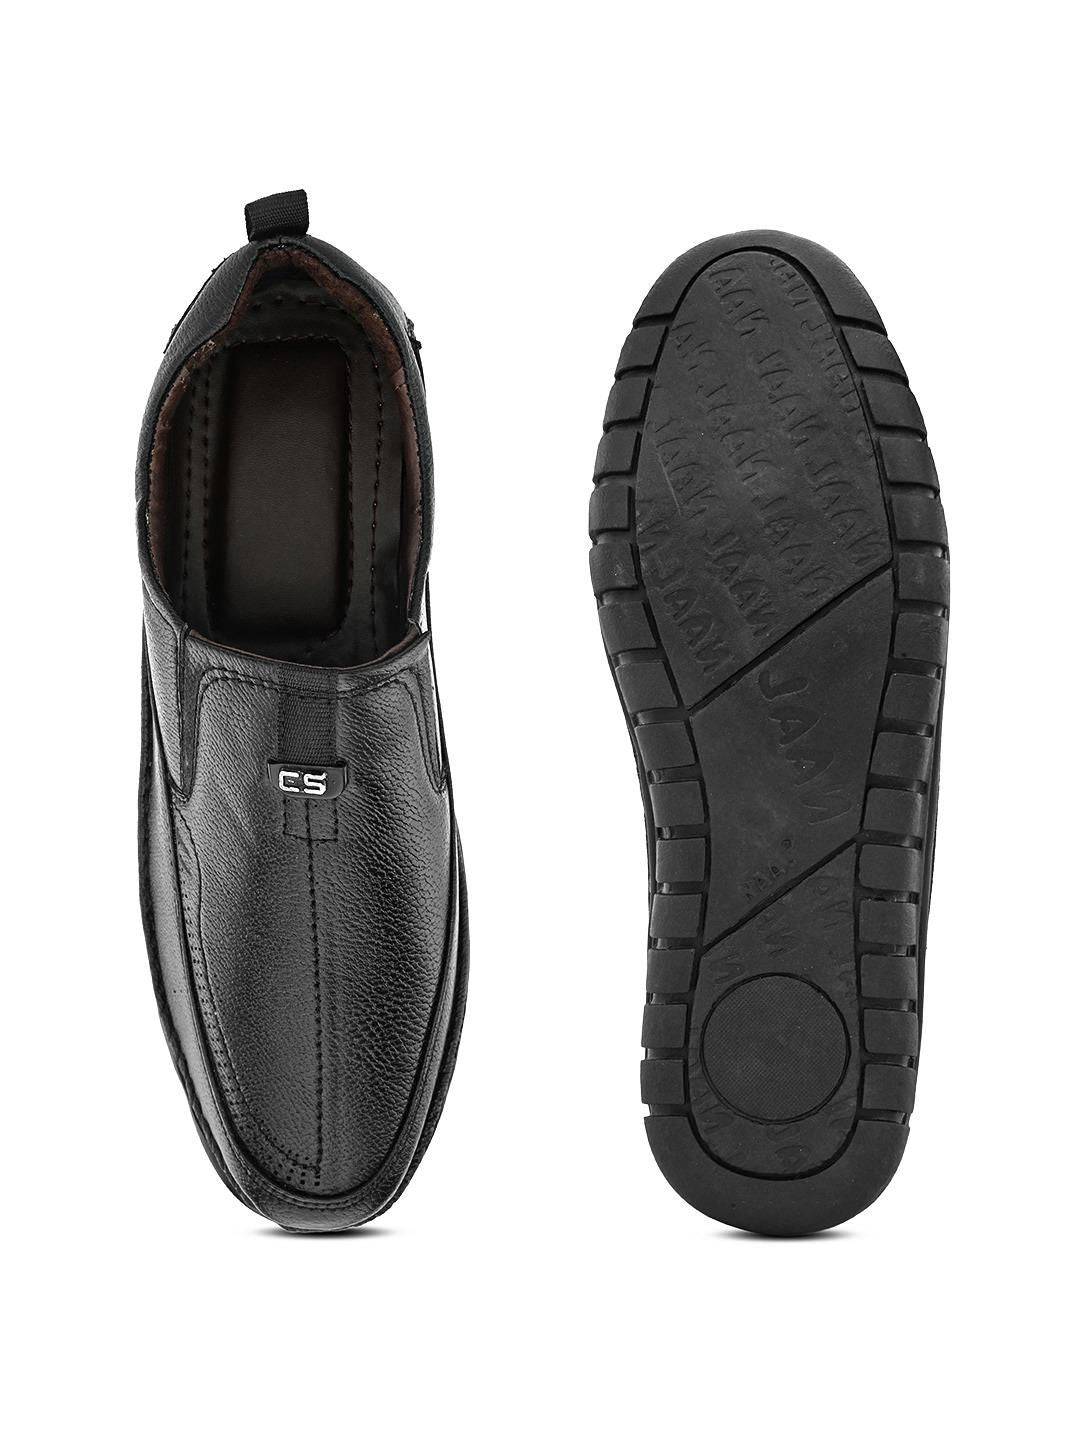 Men's Leather Slip-on Moccasin Casual Shoes